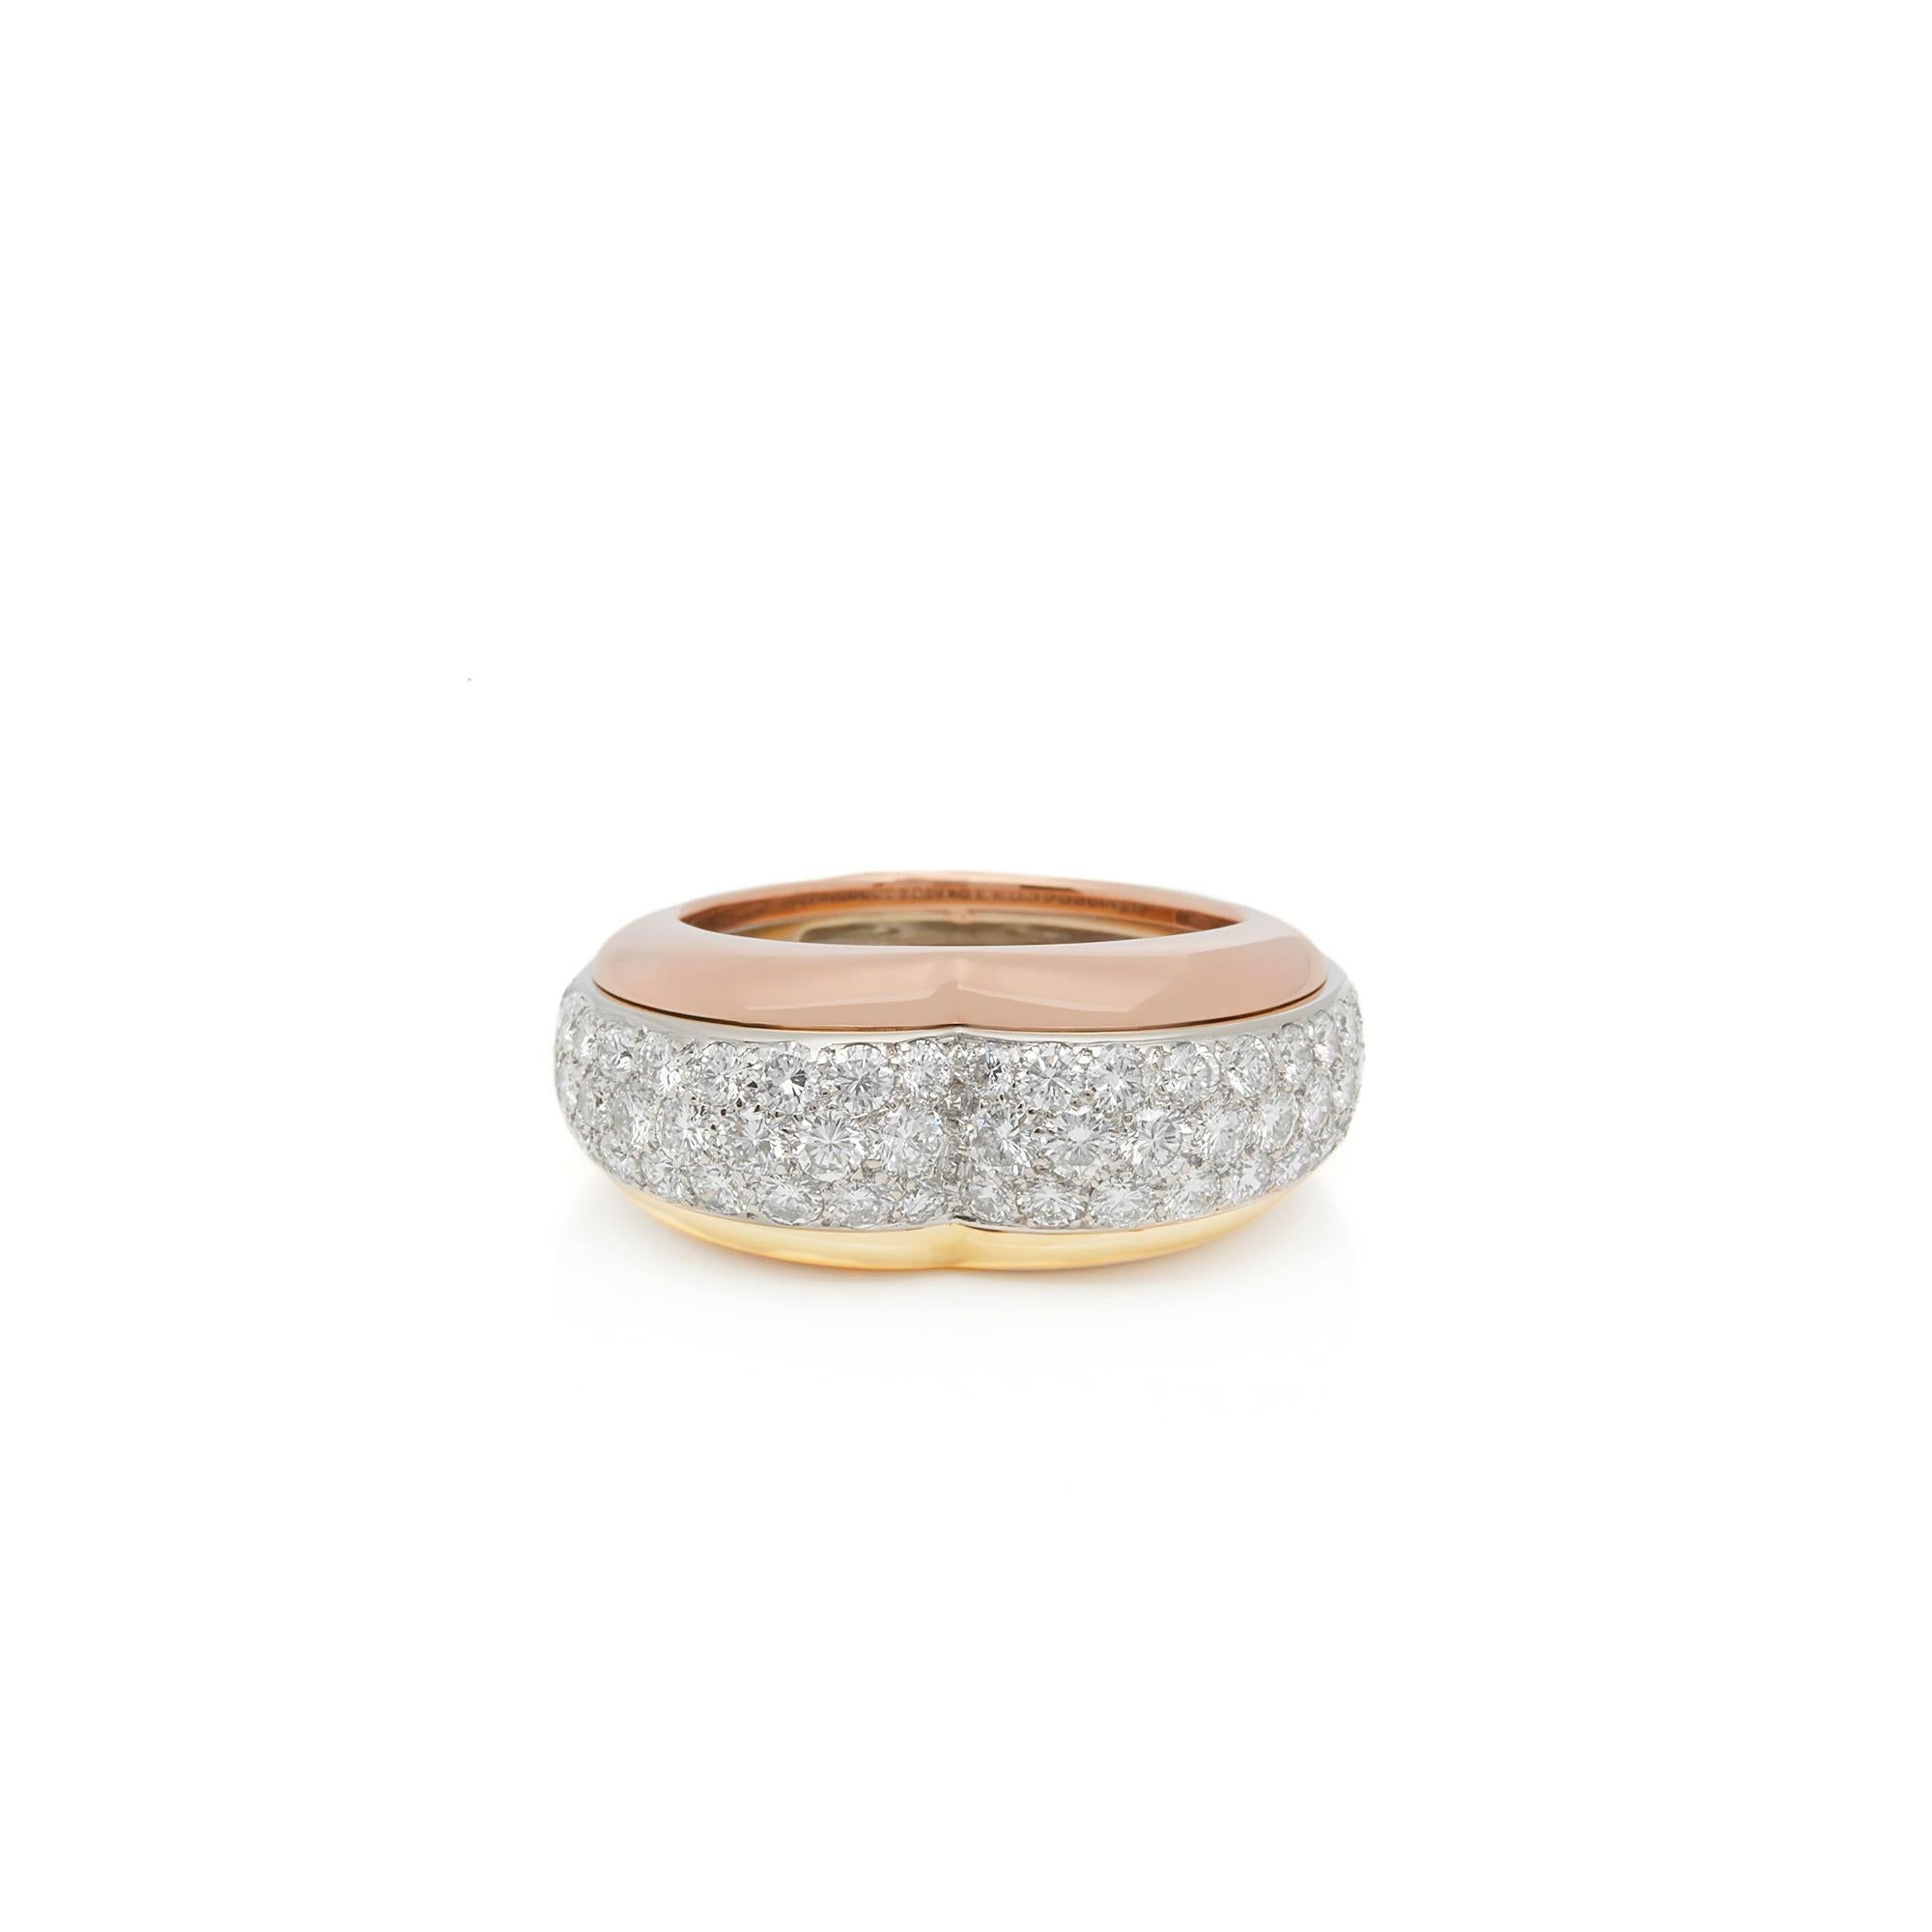 Contemporary Cartier 18k Yellow, White and Rose Gold Diamond Heart Shaped Ring